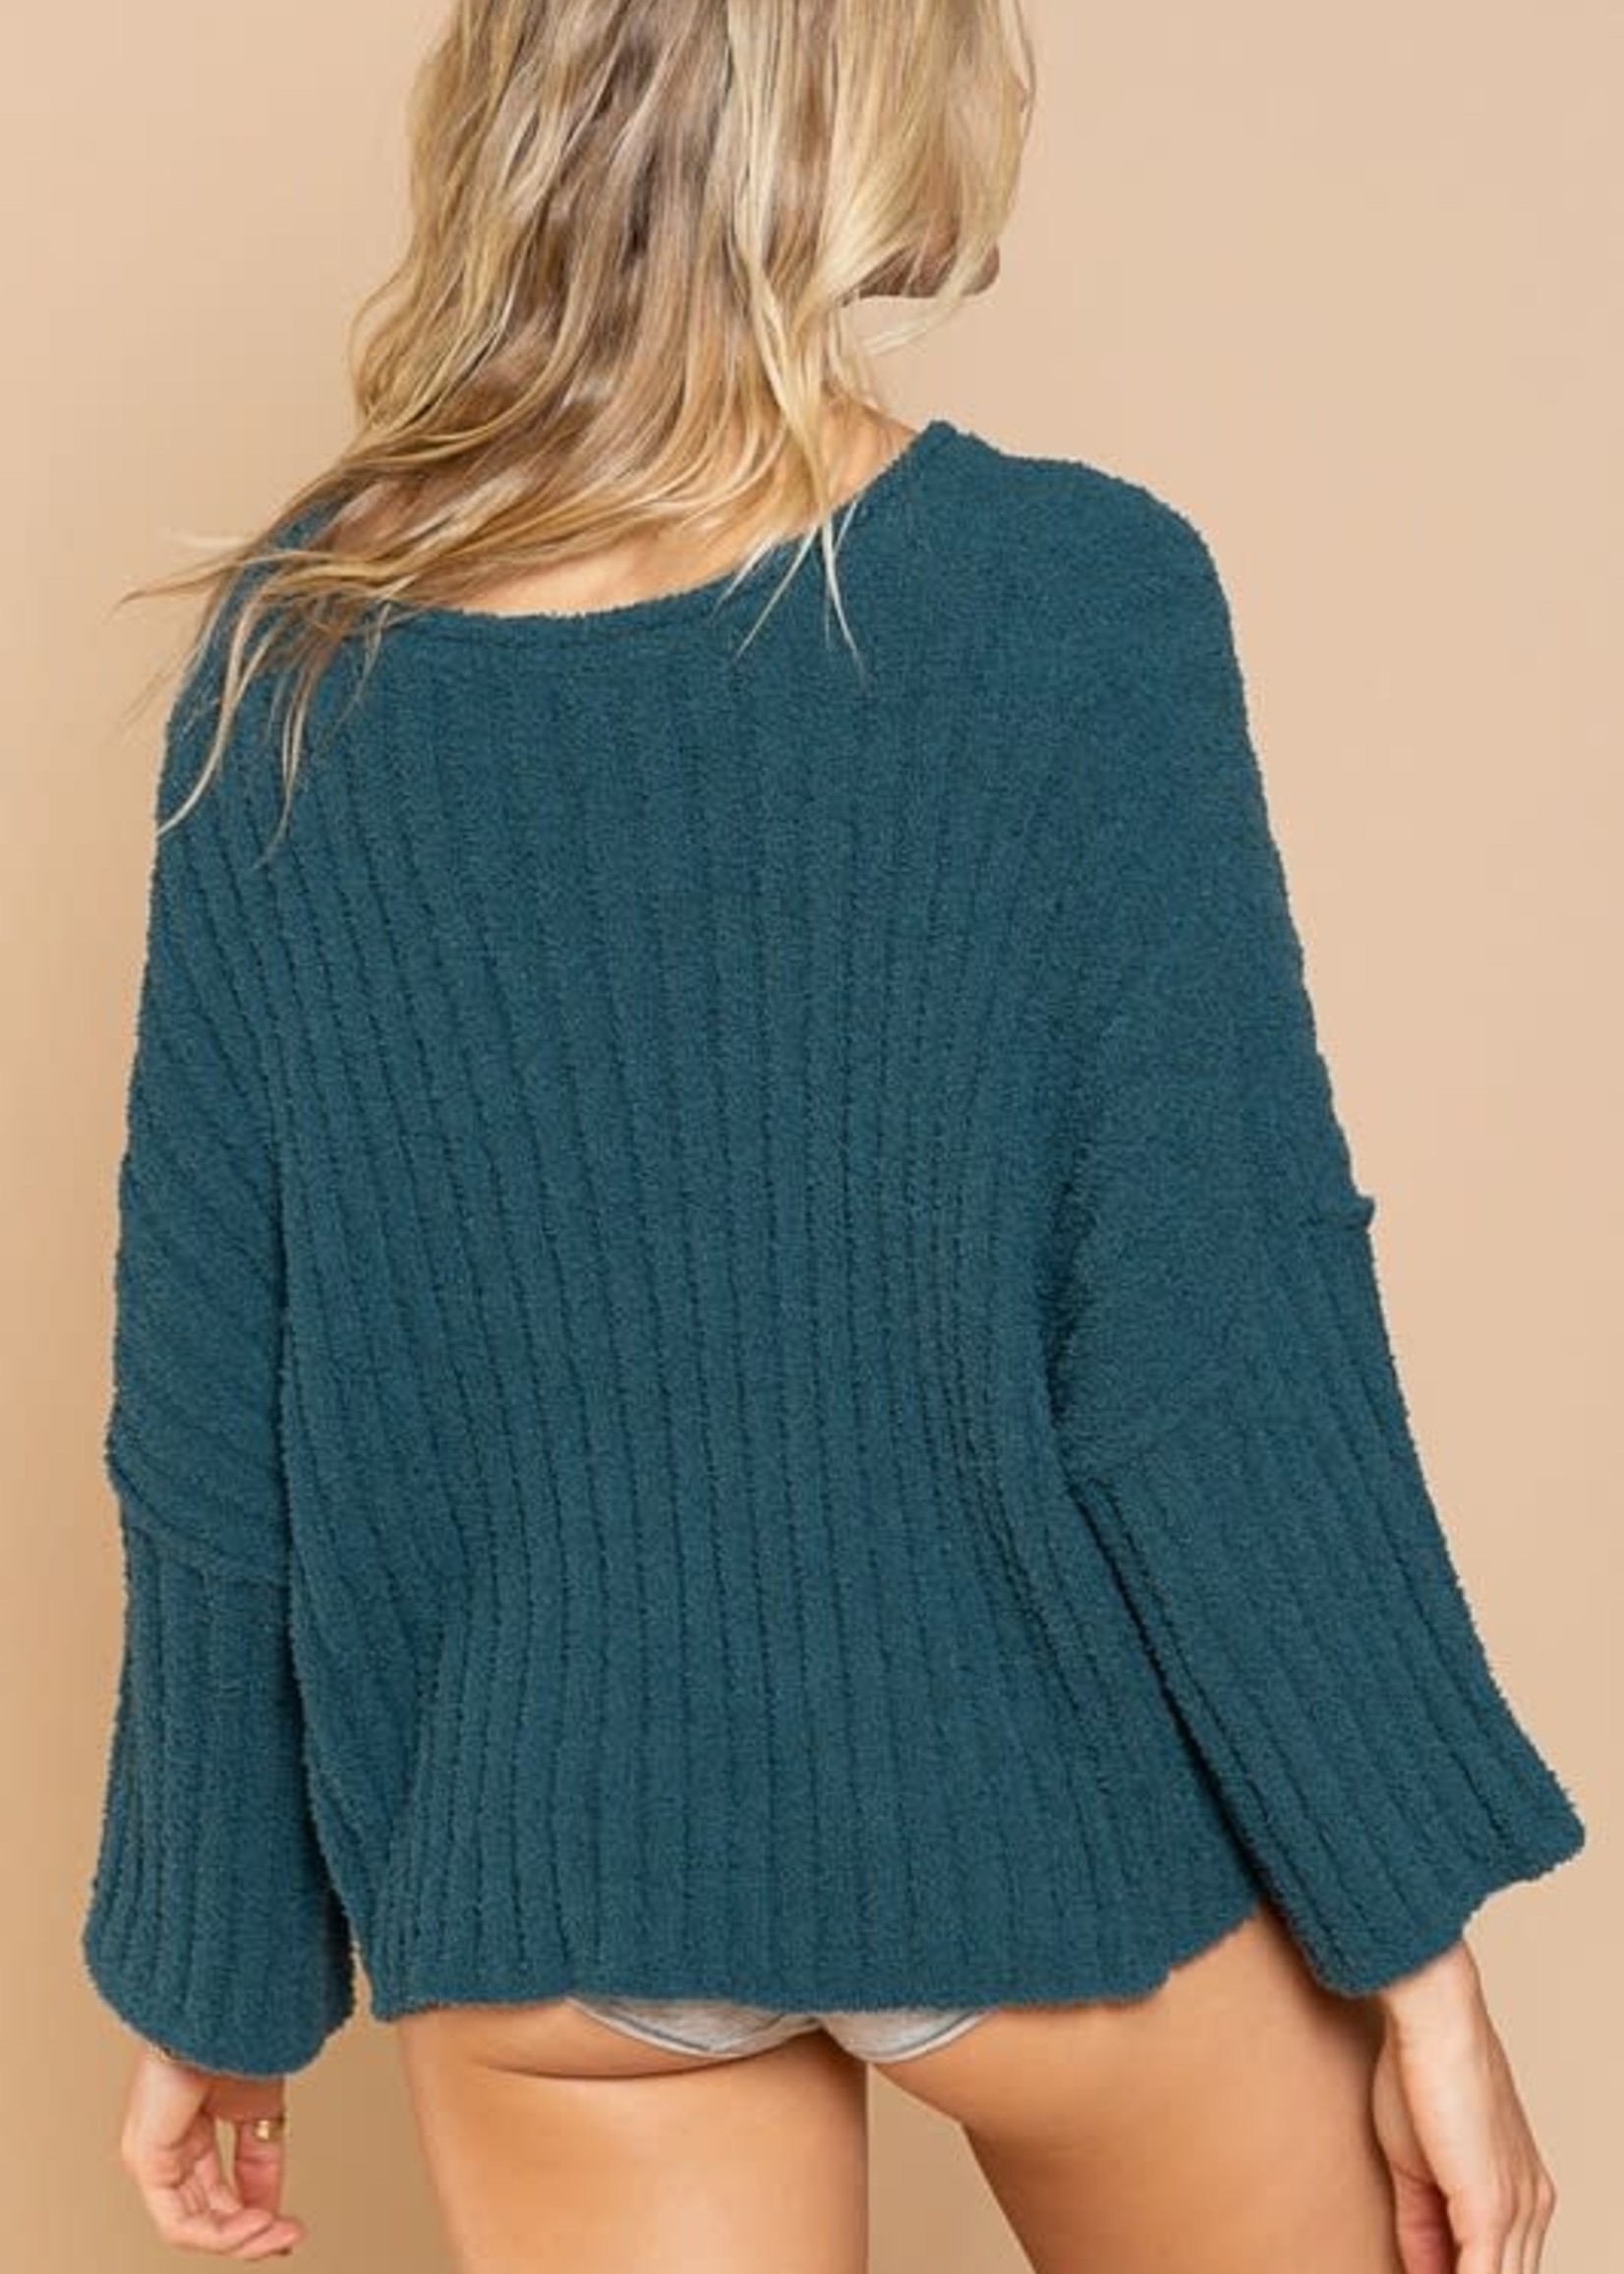 Best Of Sweater Weather (4 Colors)